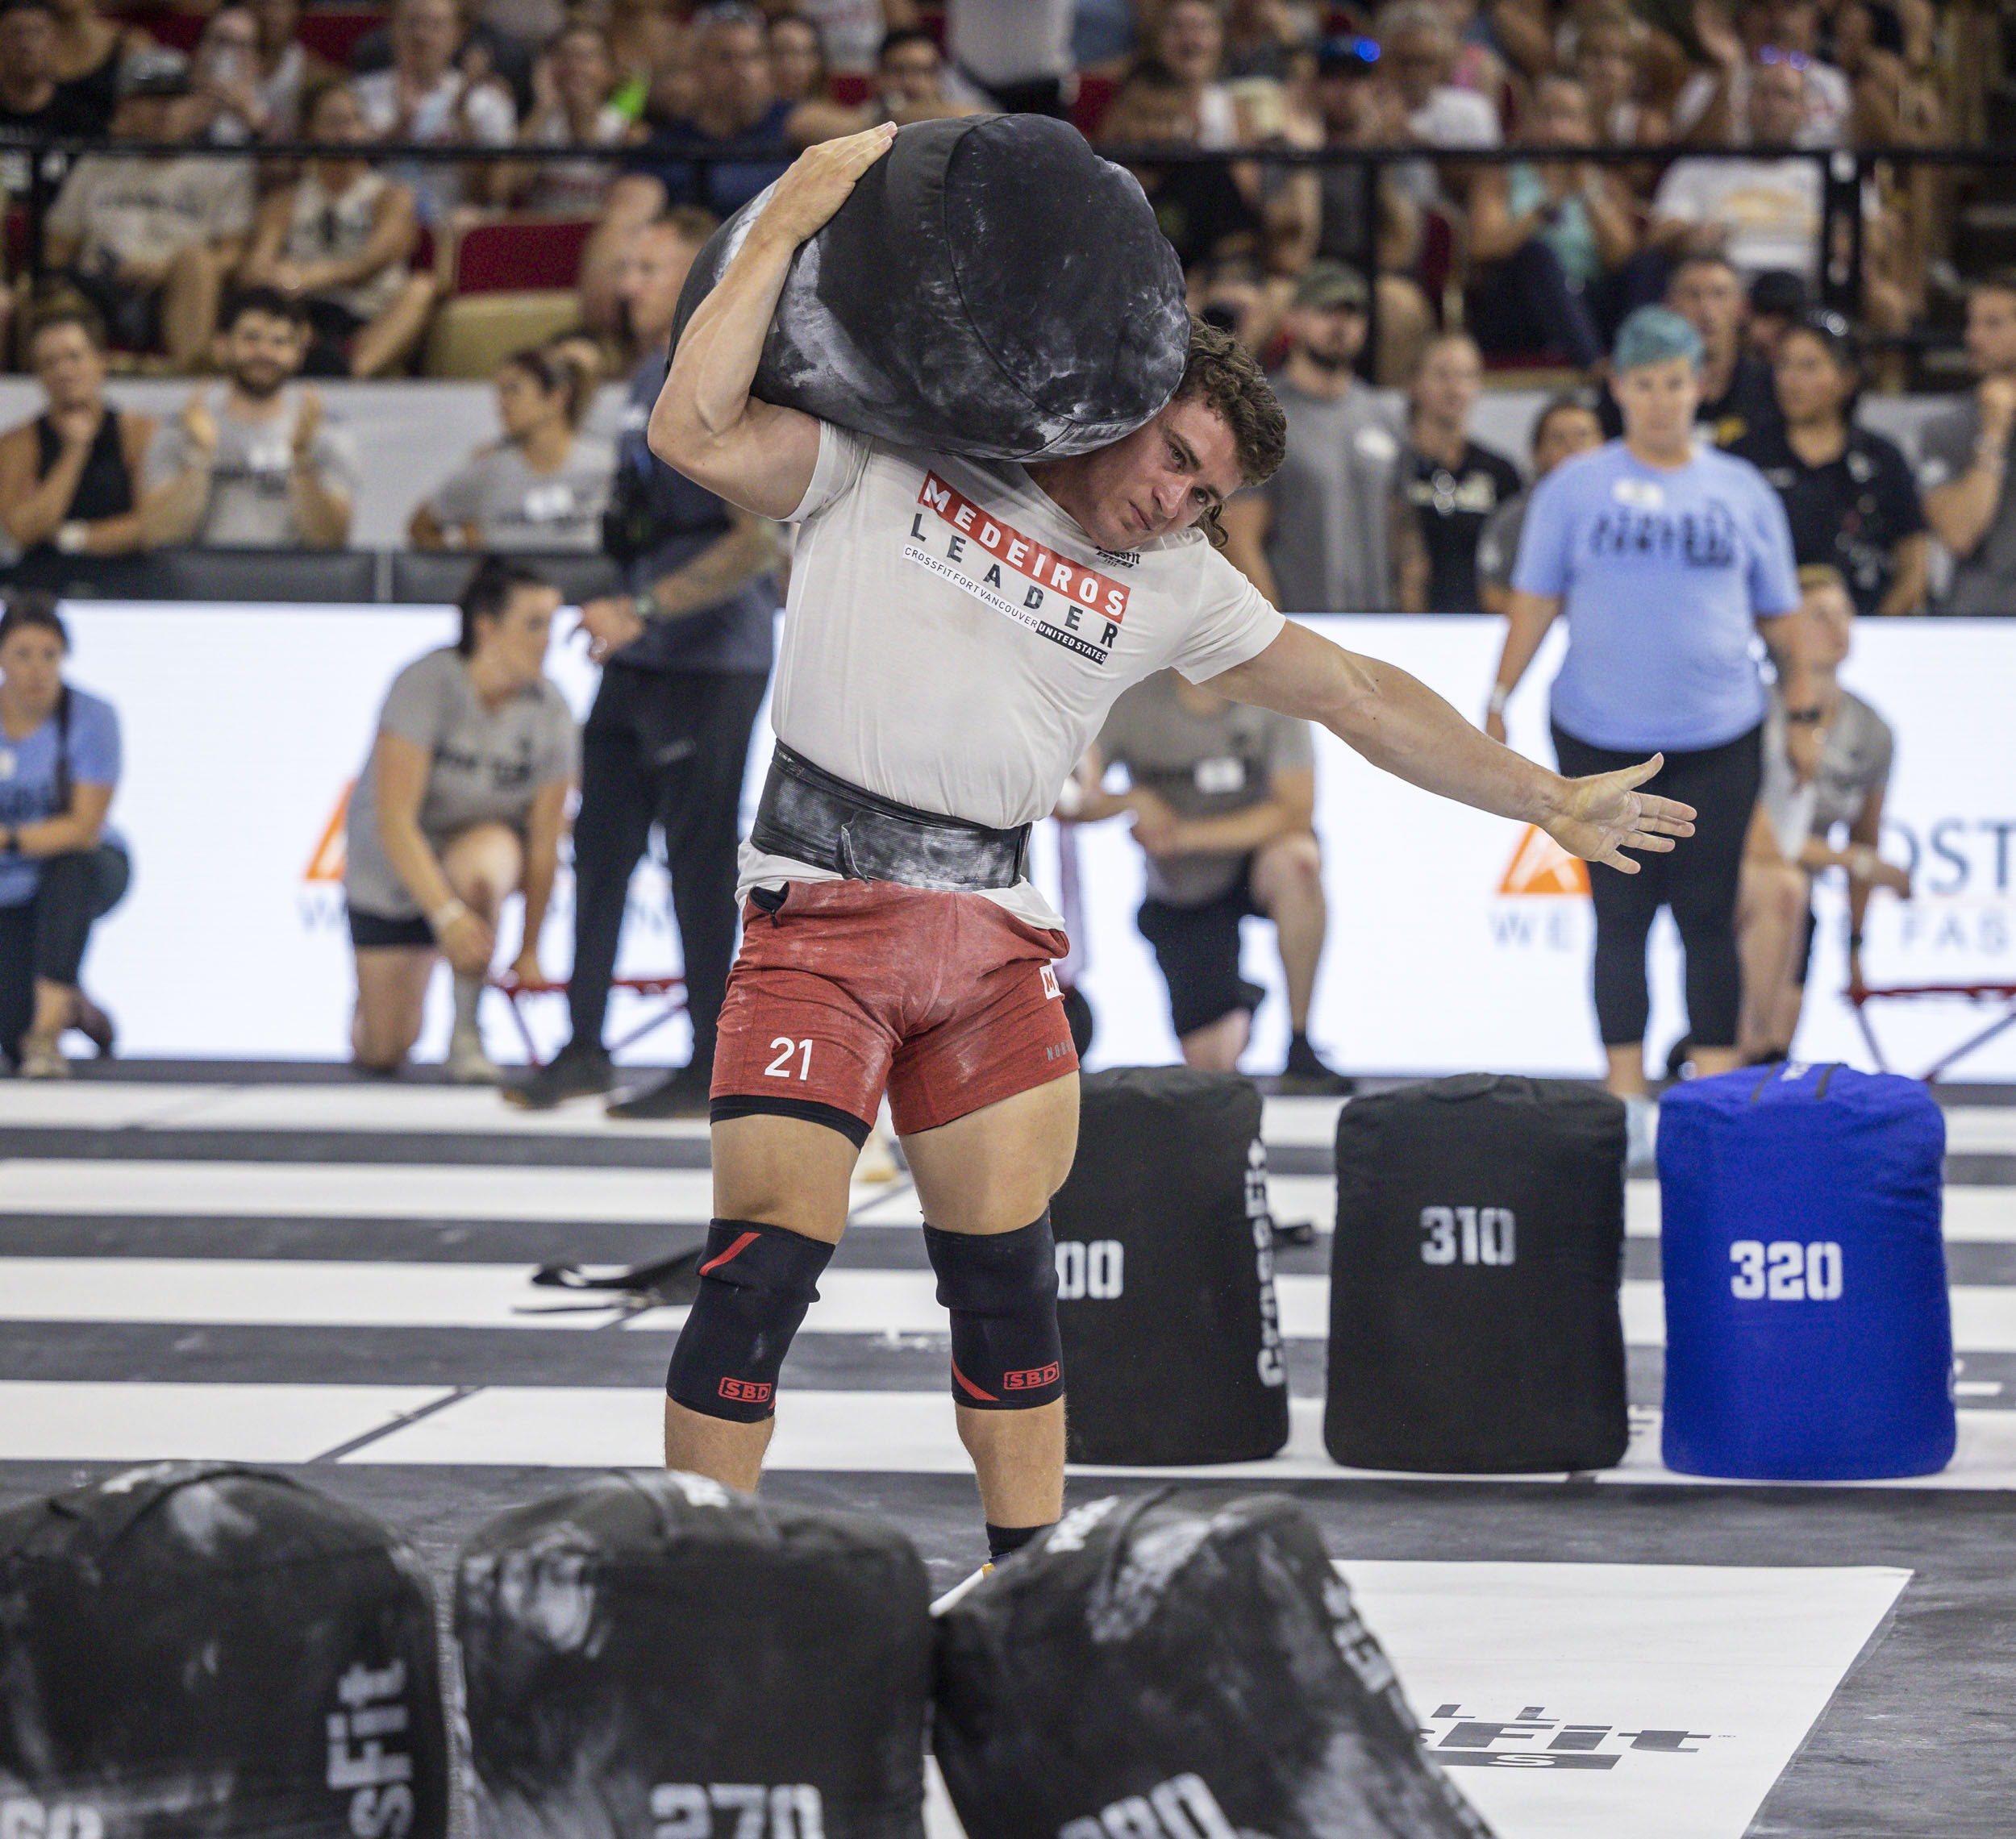 Justin Medeiros wins his second Fittest on Earth title. Photo: CrossFit Games